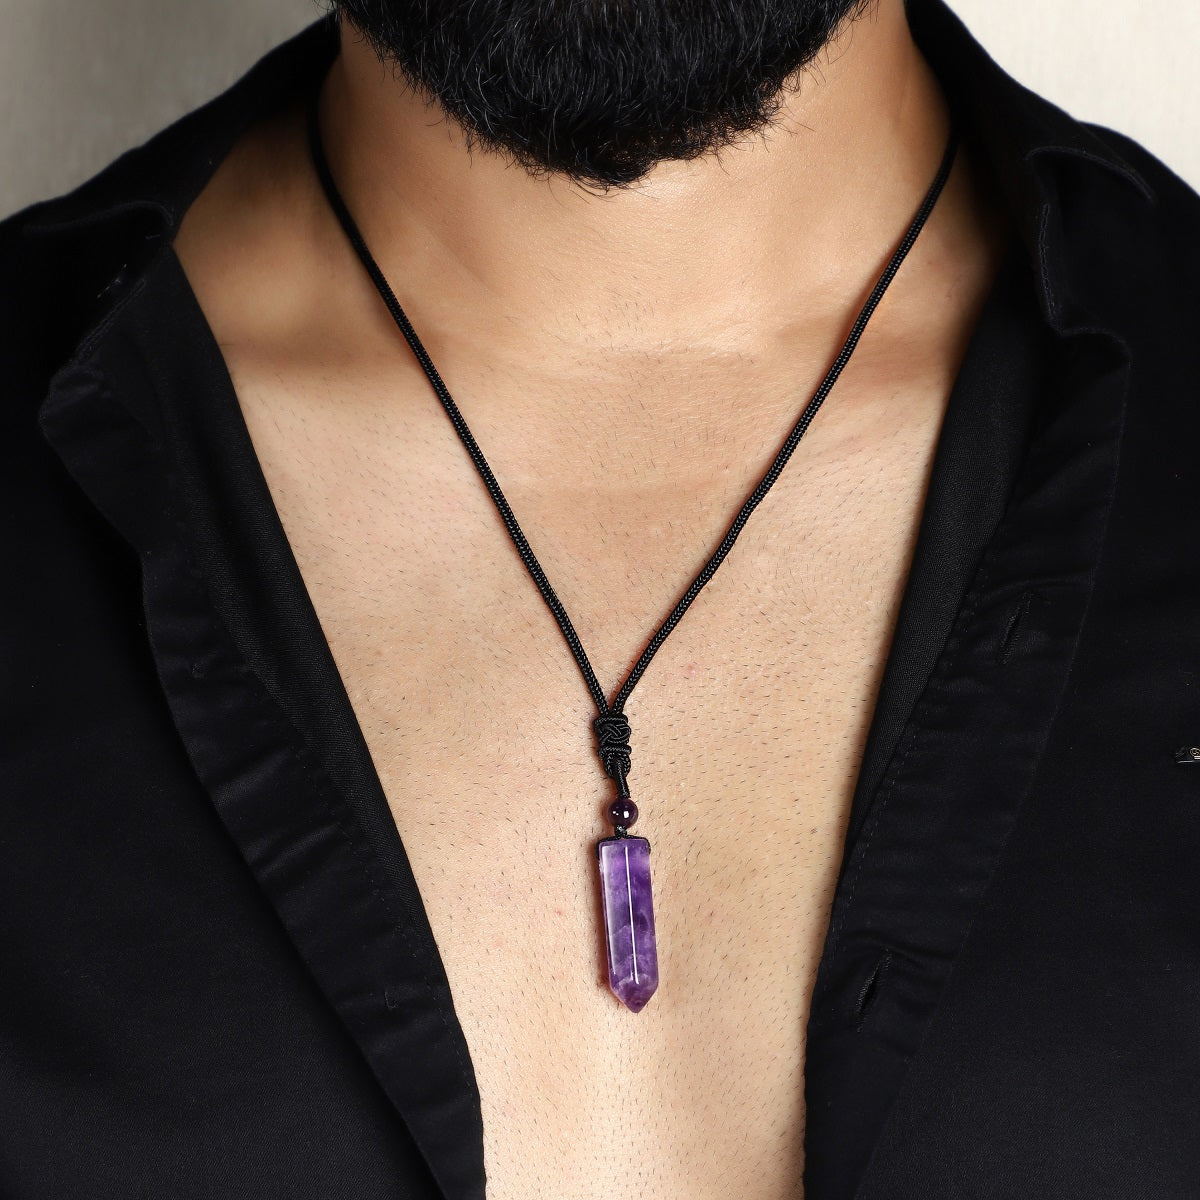 QXGSZA Natural Amethyst Crystal Pendant Necklace for Women Men Raw Amethyst  Pendant Crystals Necklaces Chakra Stones Energy Crystals and Healing Stones  Necklace Reiki Chakra Meditation Therapy…, price in UAE | Amazon UAE |